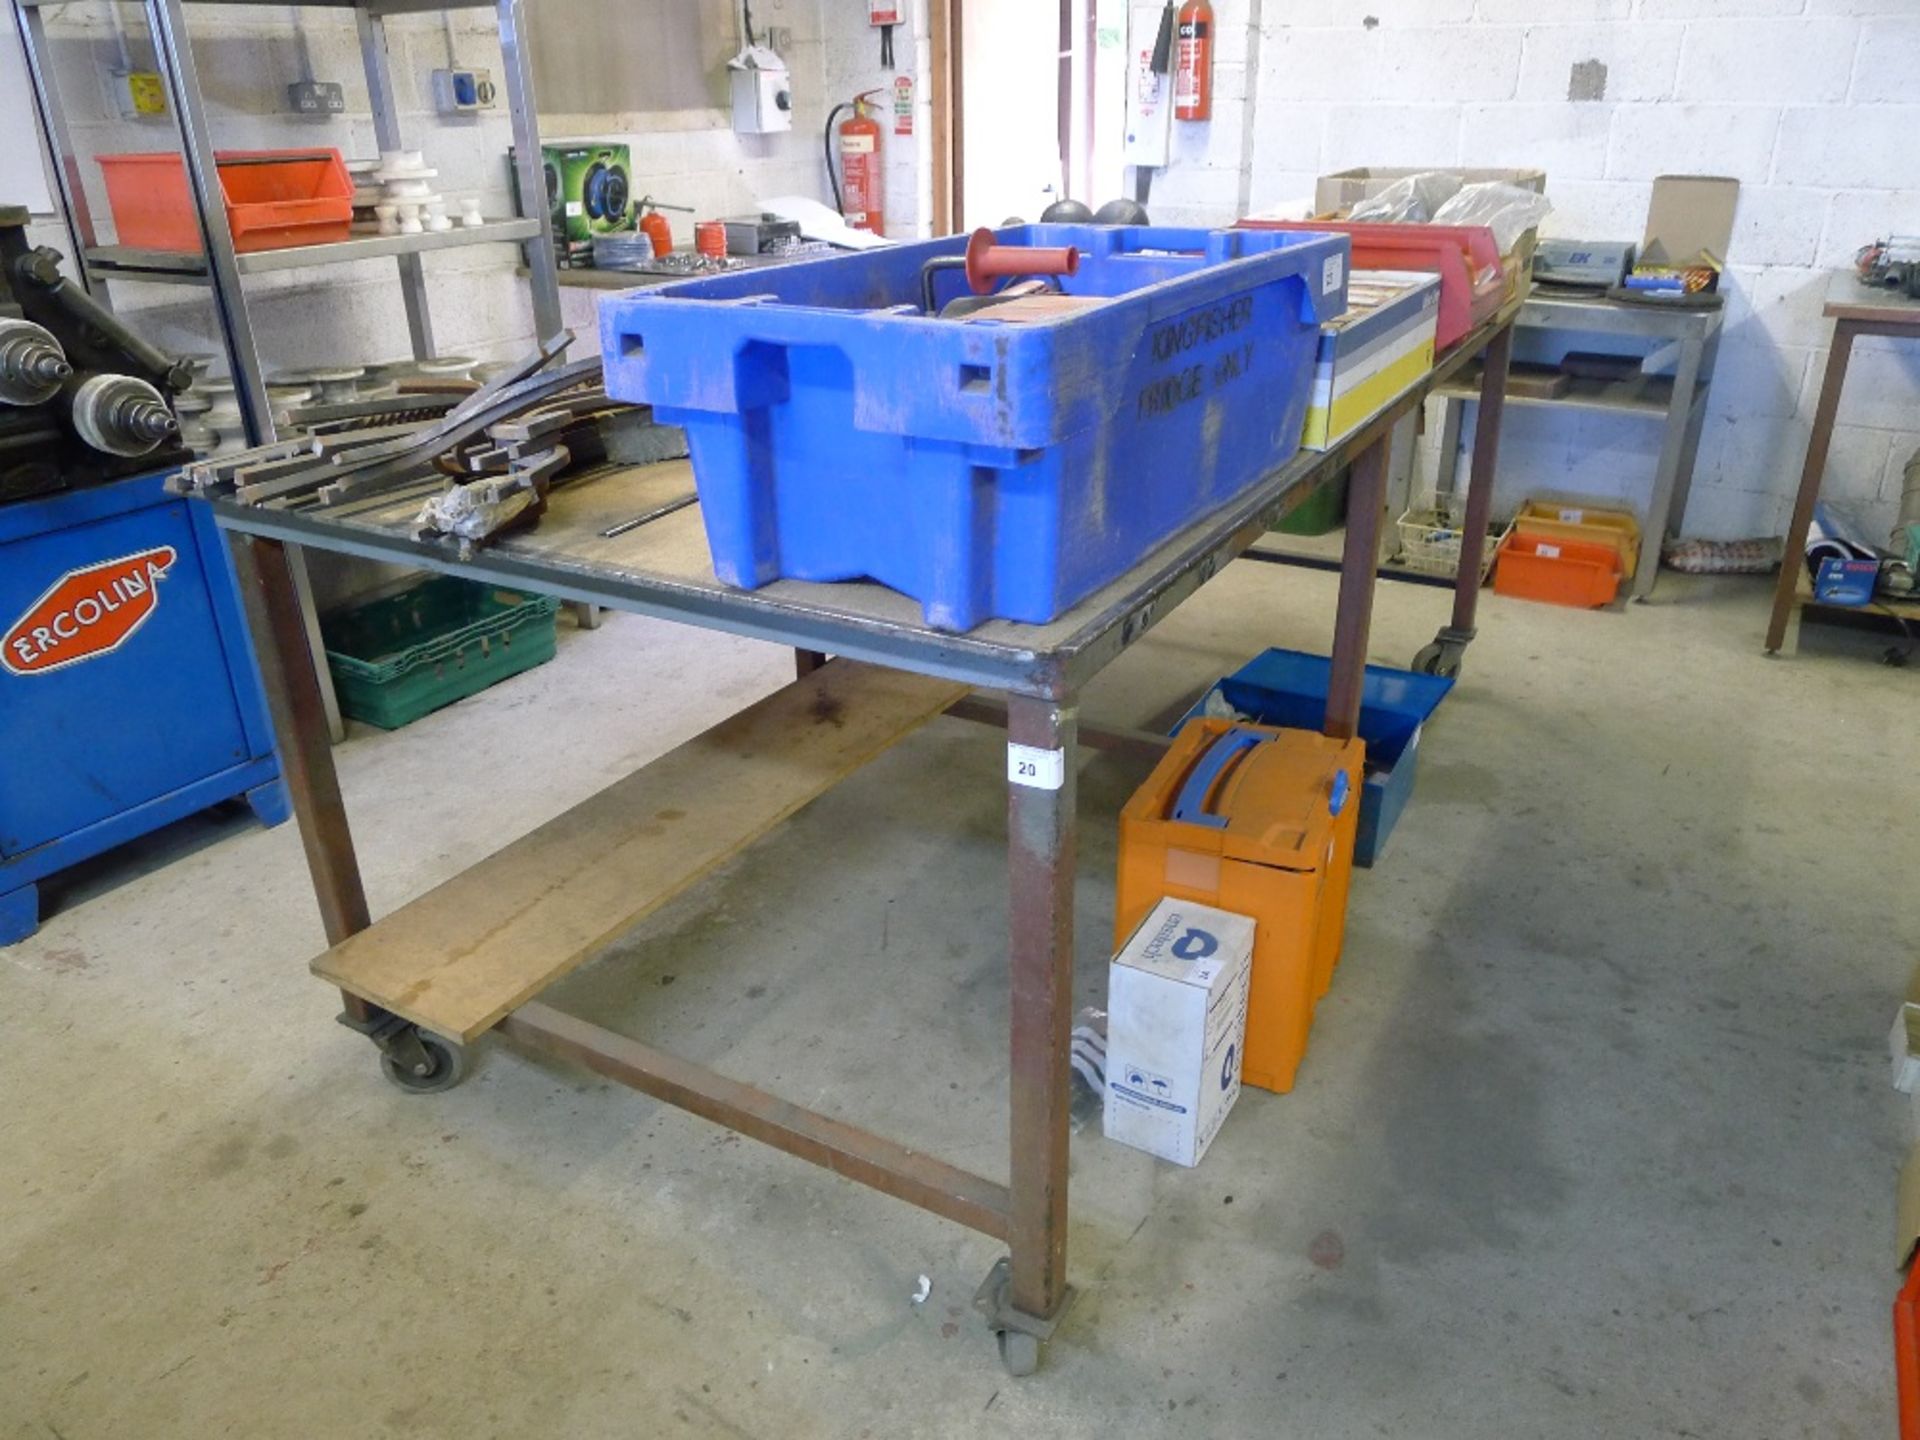 1 metal topped fabrication bench on wheels approx 2.5m x 1.25m - Image 2 of 3